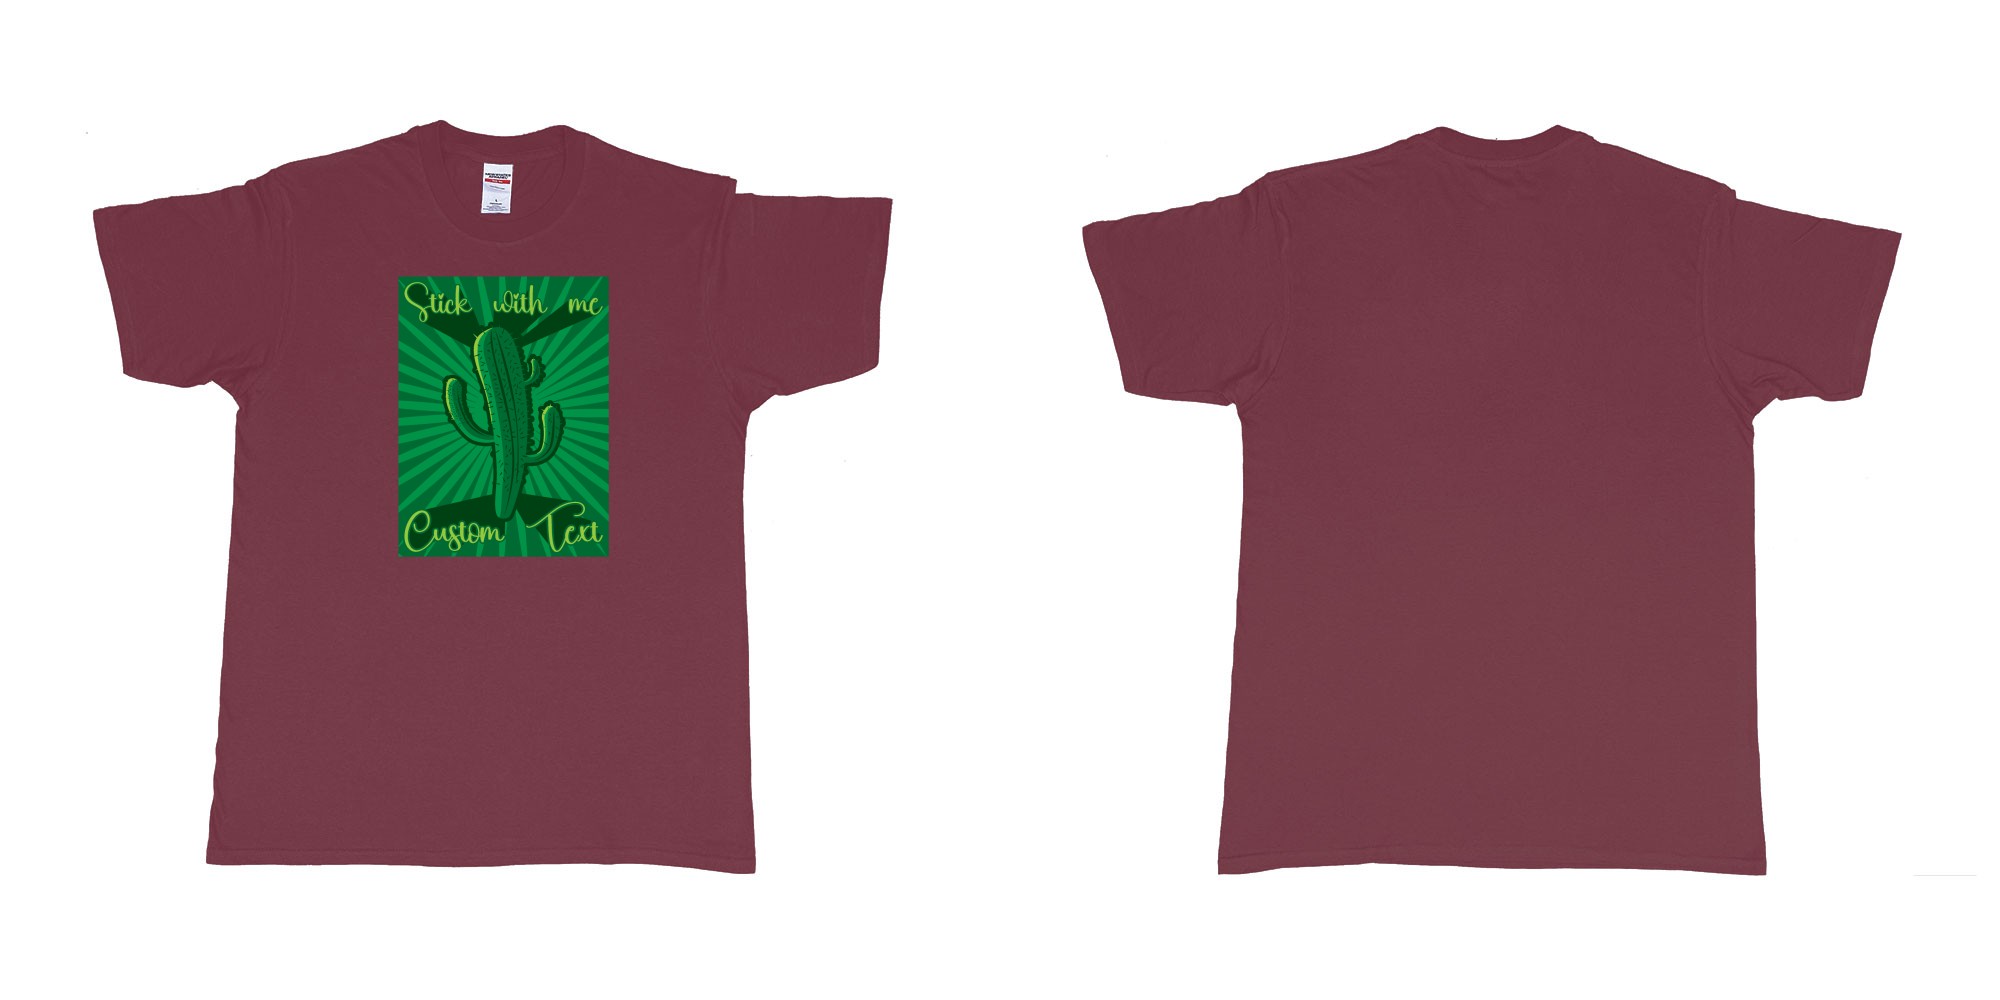 Custom tshirt design cactus stick with me in fabric color marron choice your own text made in Bali by The Pirate Way